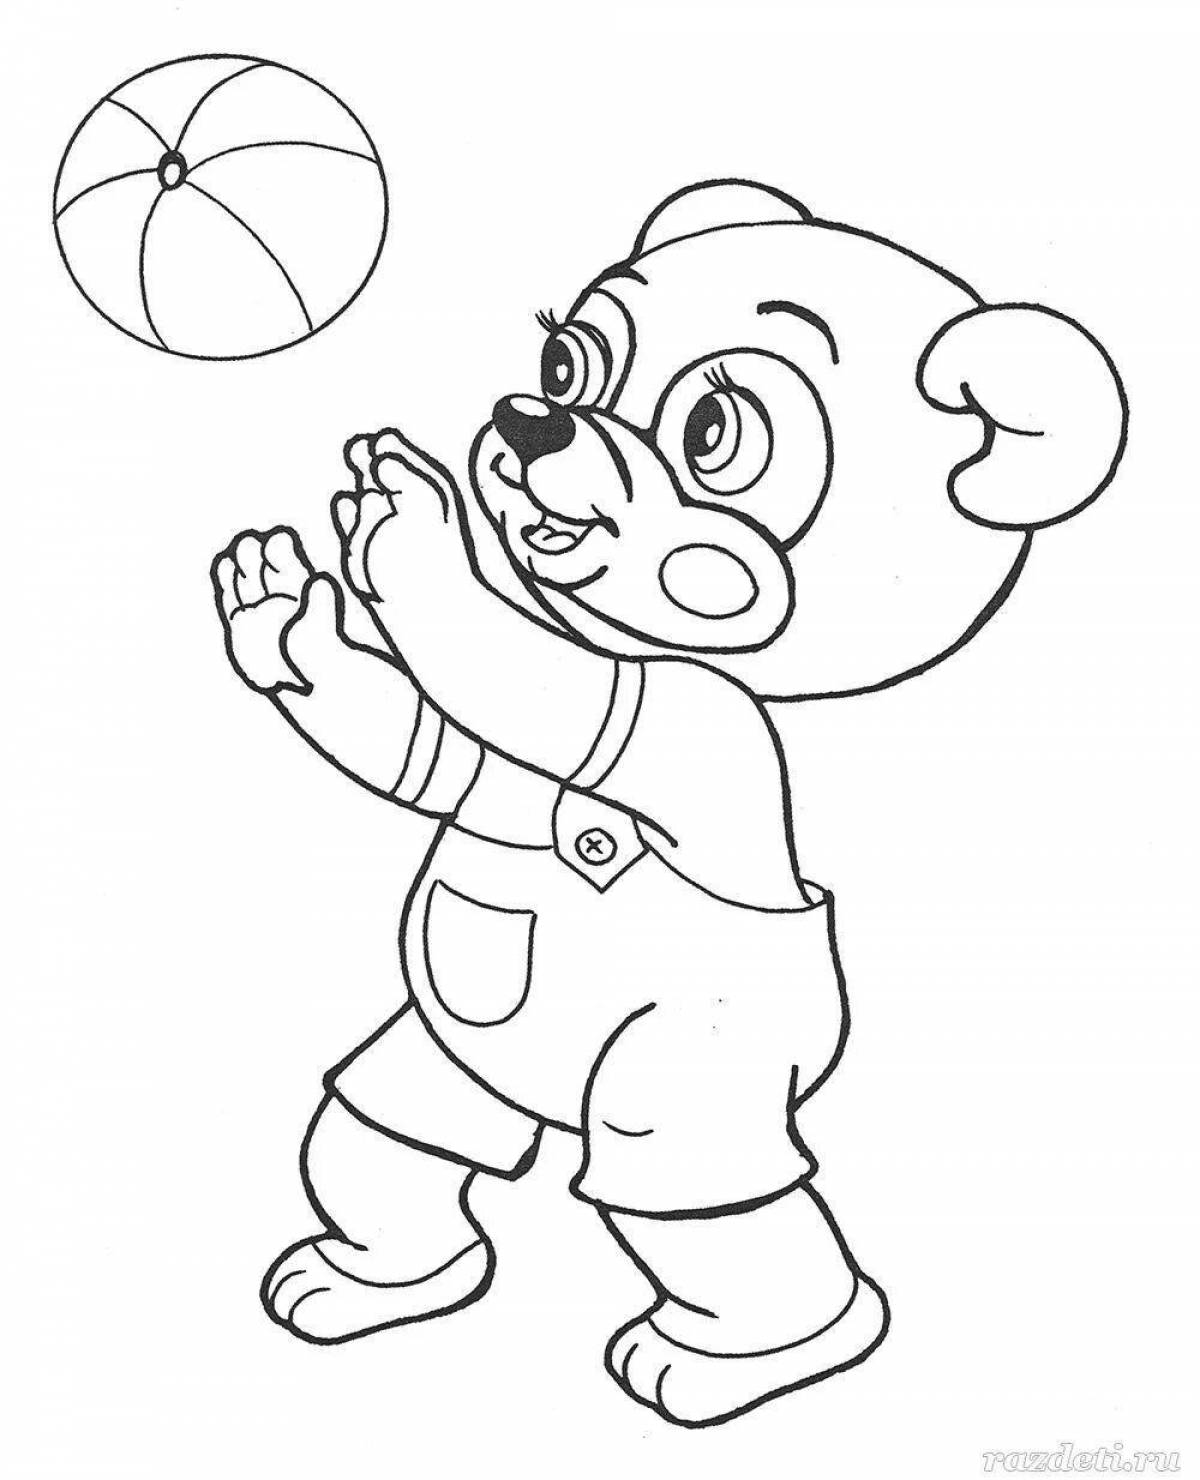 Adorable super bear coloring page